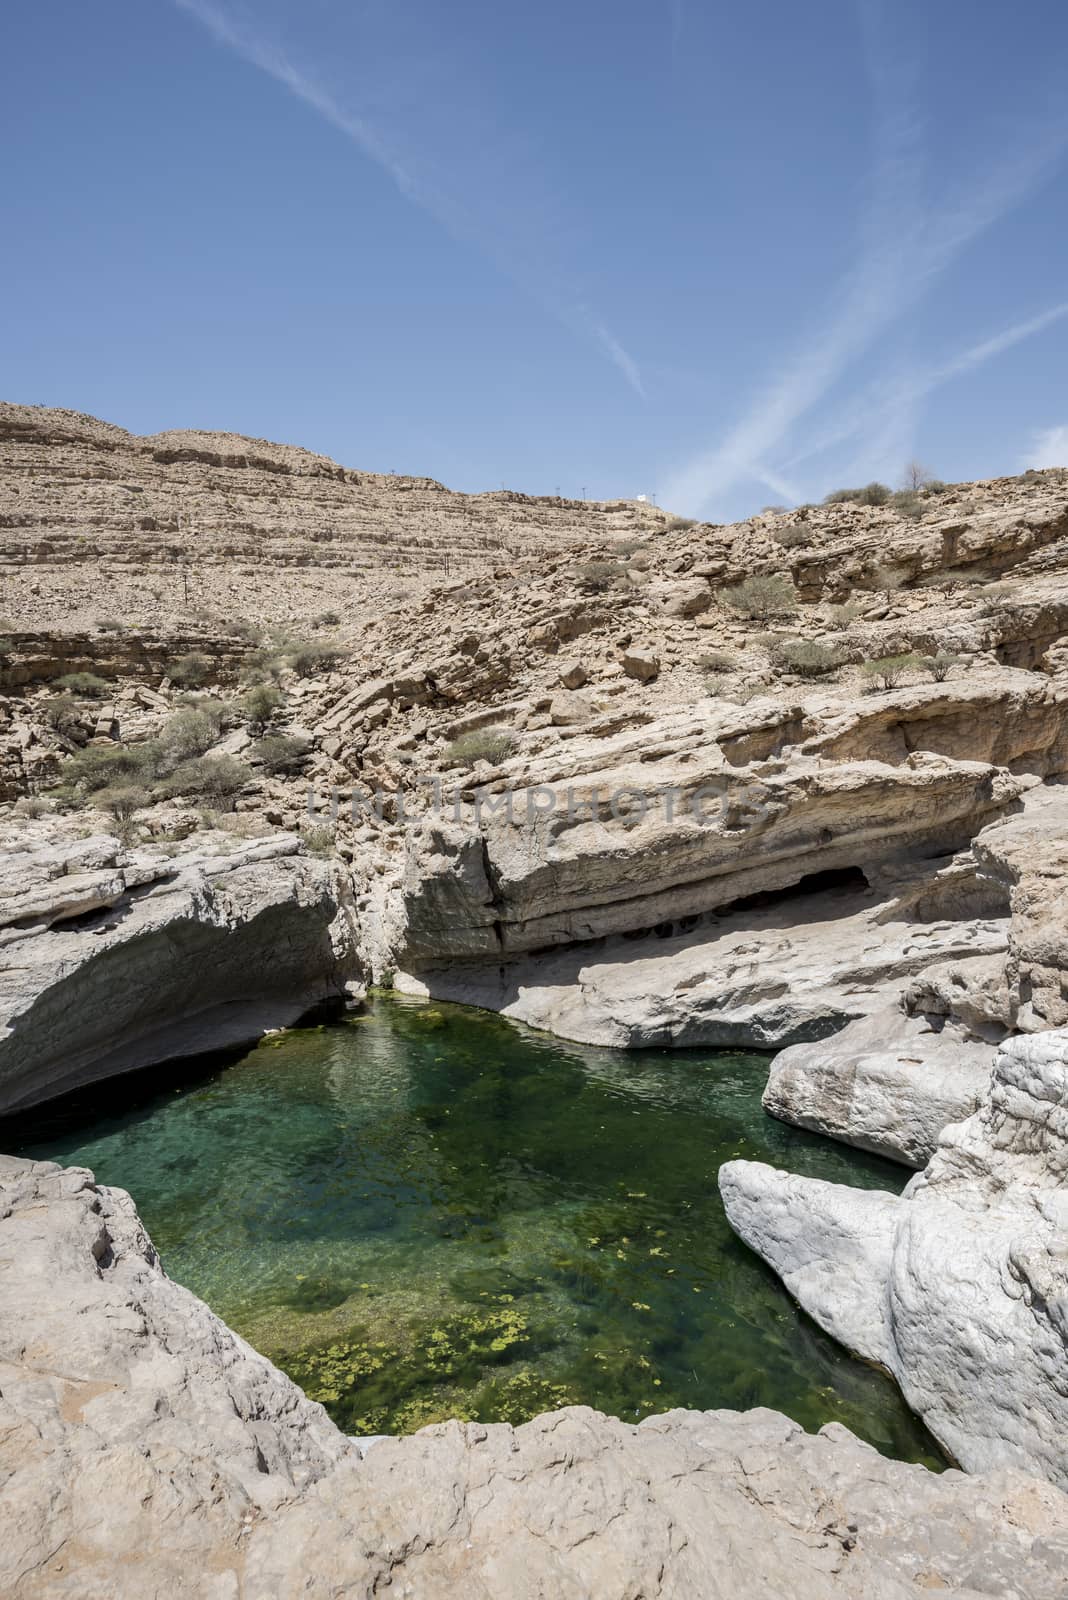 River (with turquoise water) and pool in the canyon of Wadi Bani Khalid, Oman